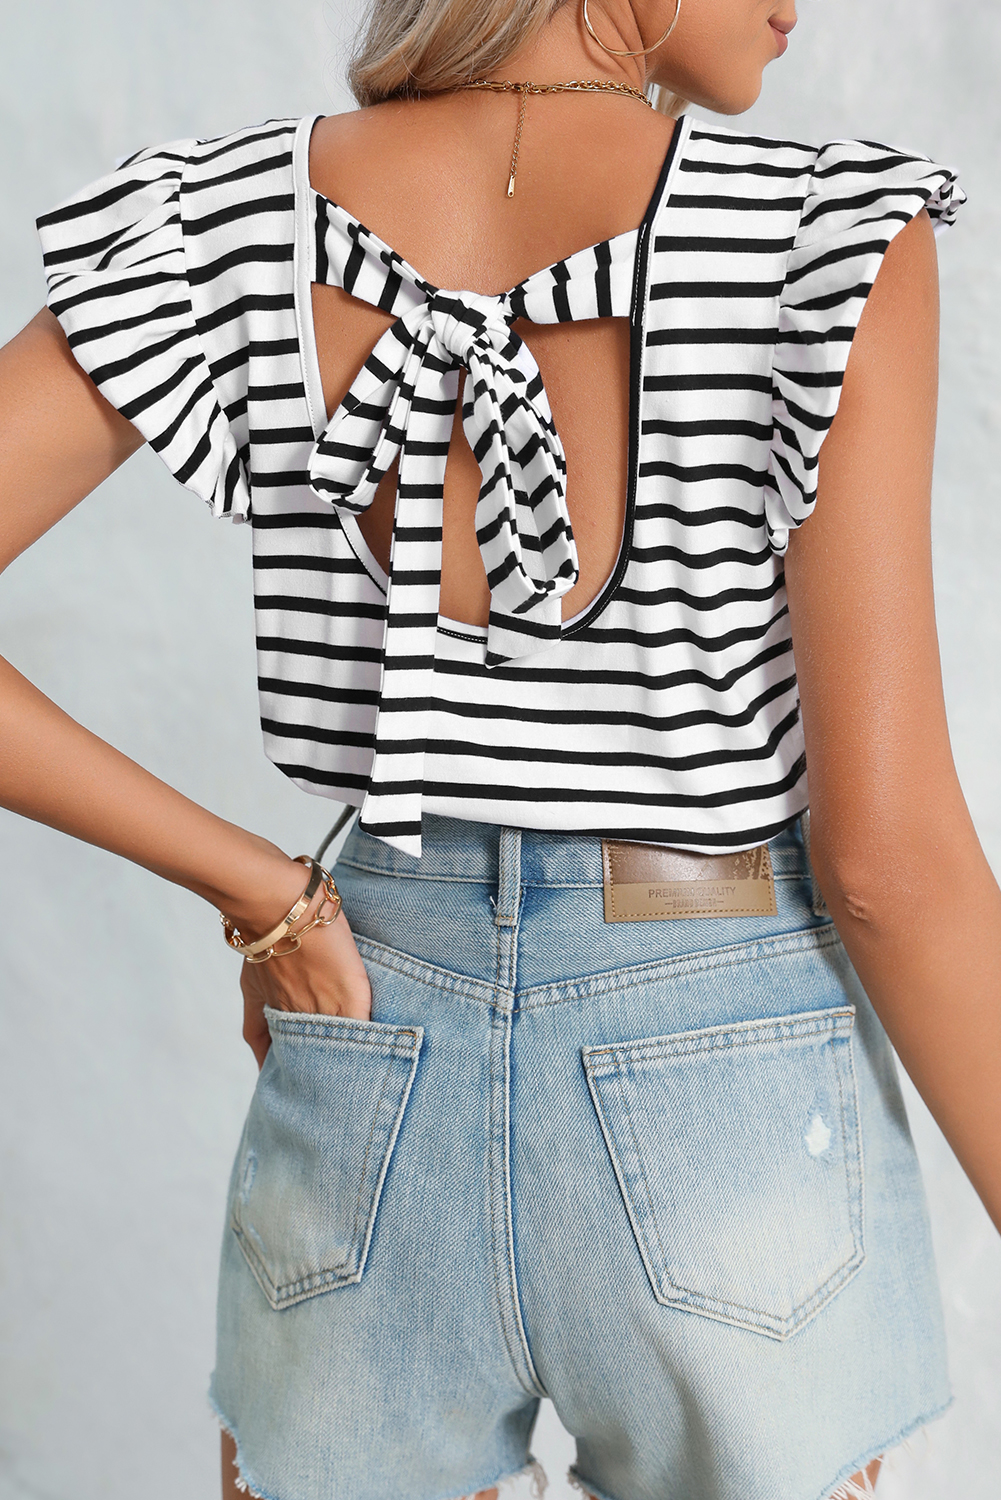 Shewin Wholesale Customized White Stripe V Neck Knotted Backless Ruffle T SHIRT